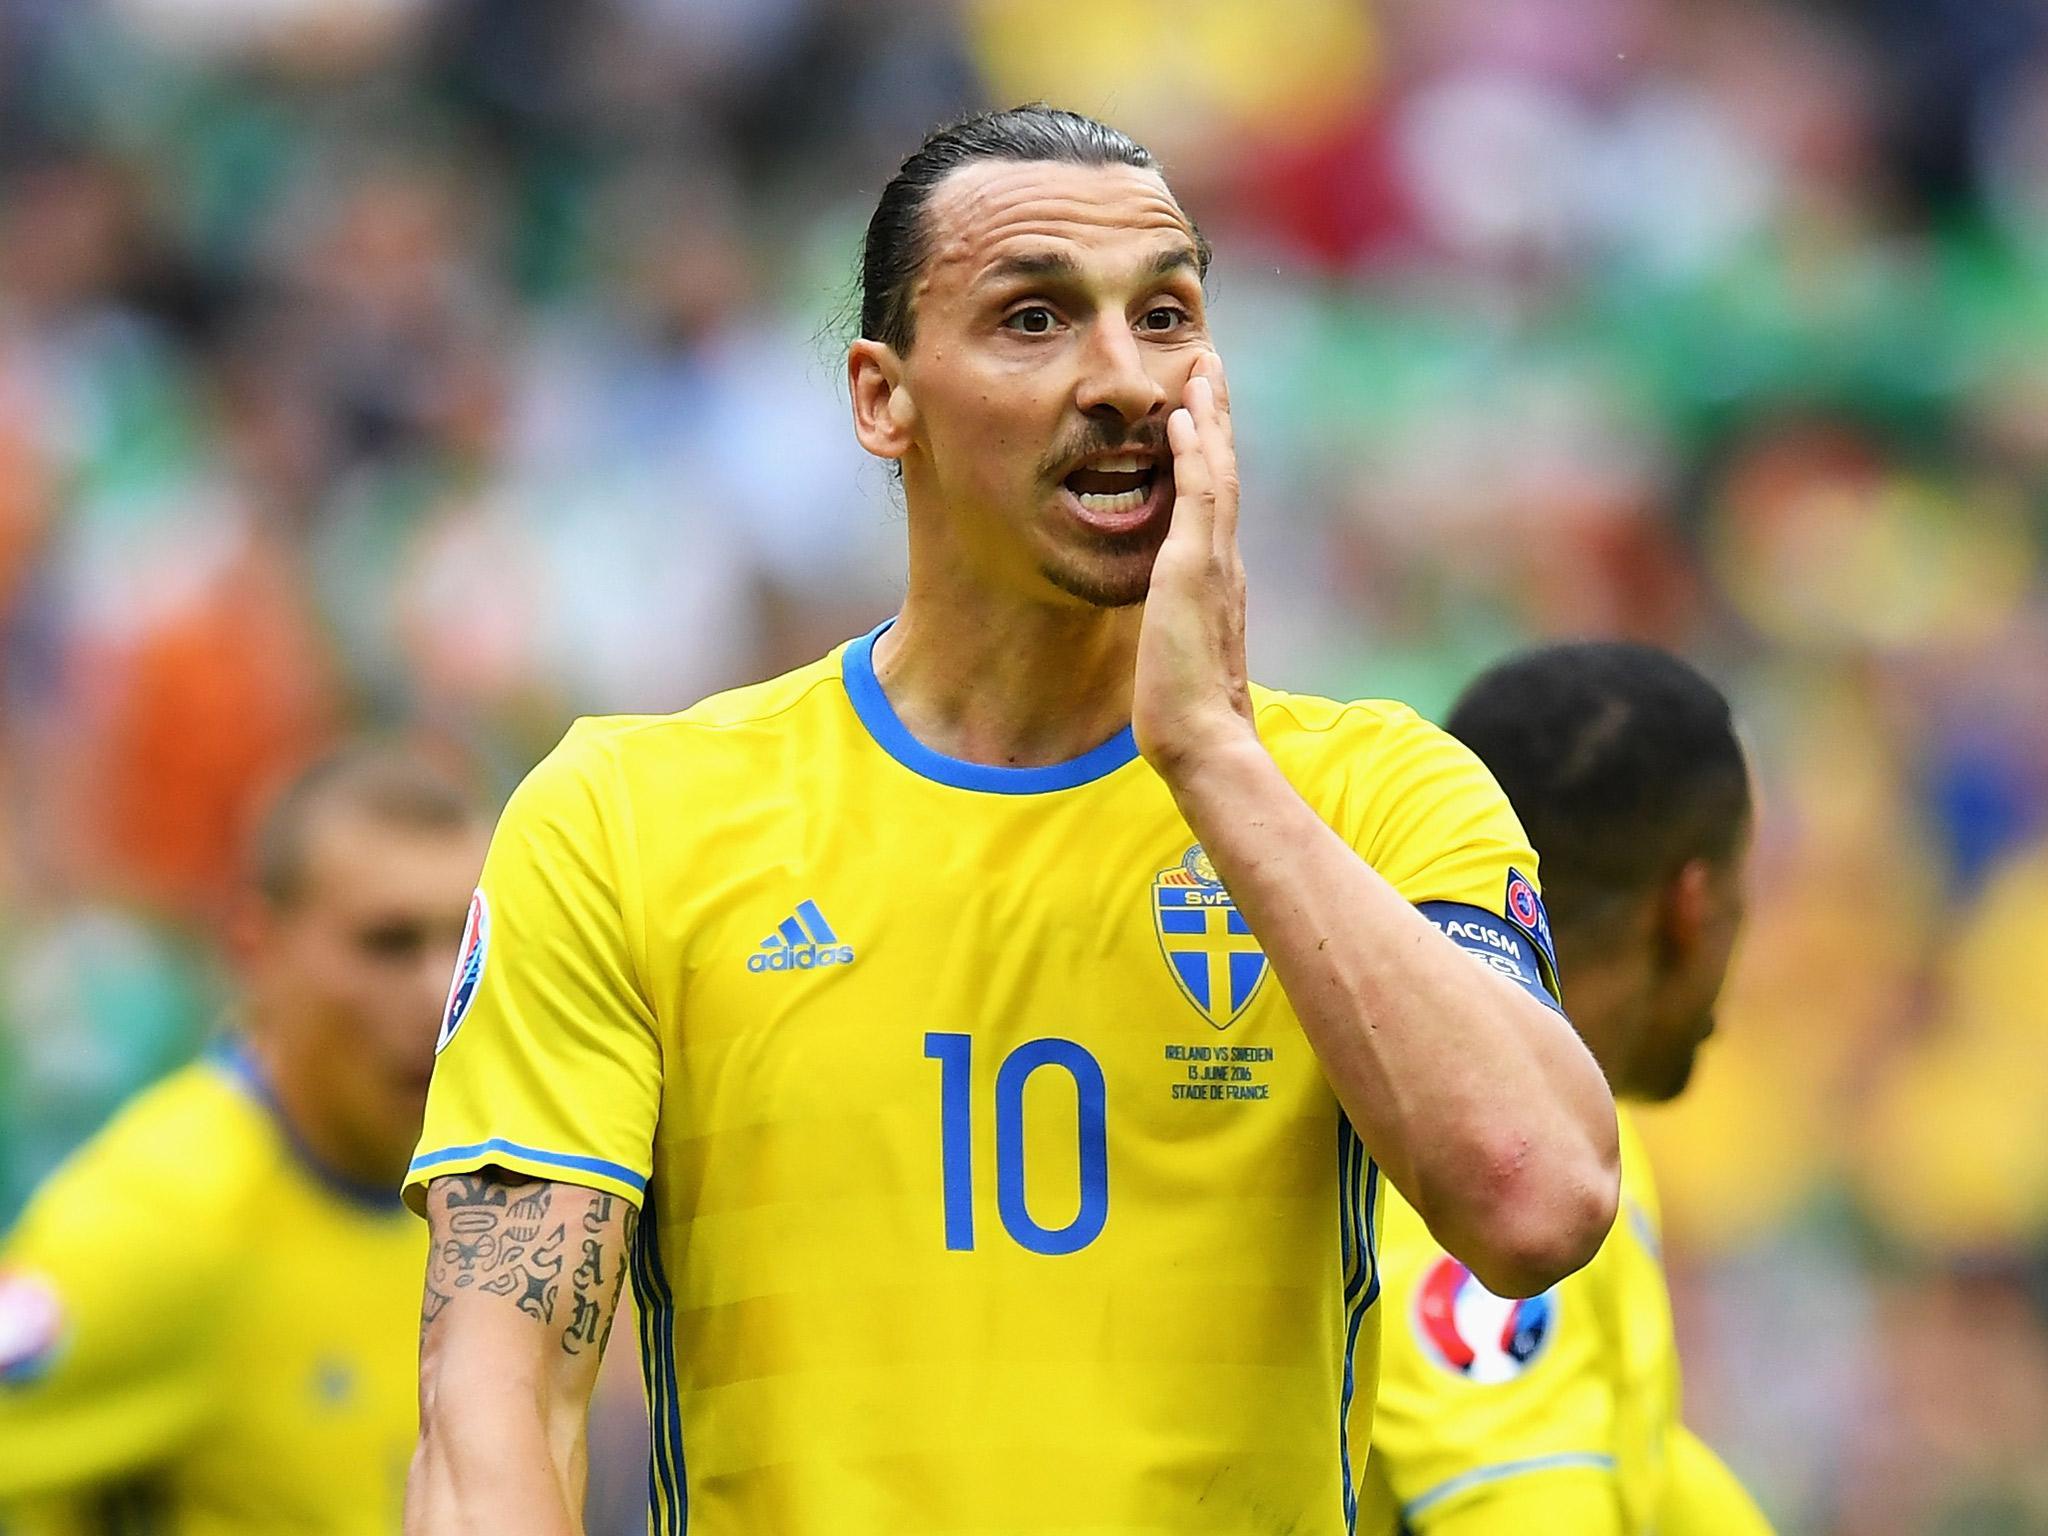 Zlatan Ibrahimovic is currently representing Sweden at Euro 2016